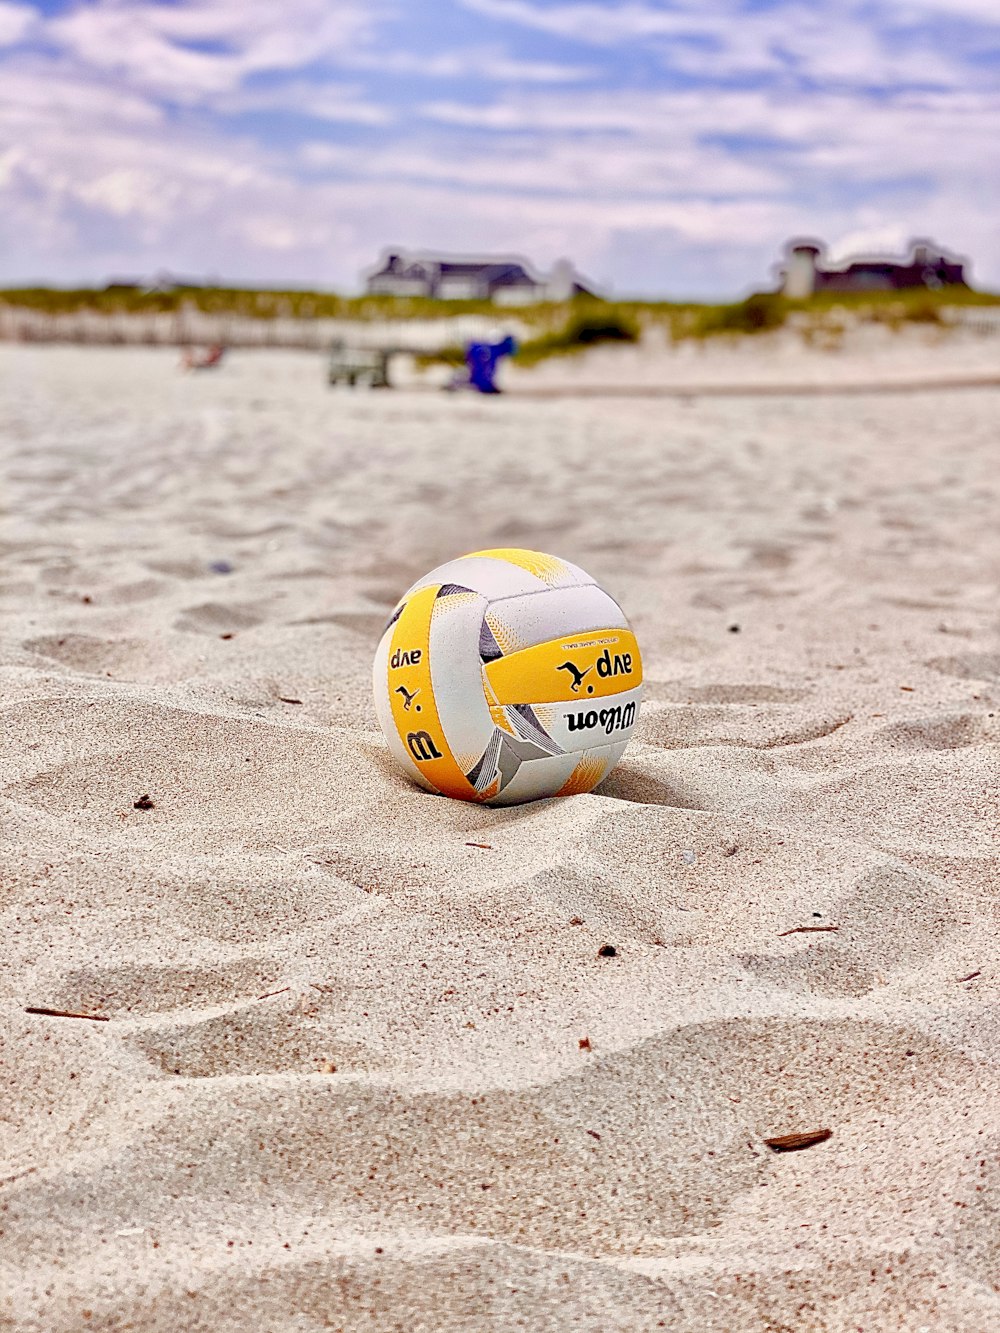 750+ Volleyball Pictures | Download Free Images & Stock Photos on Unsplash